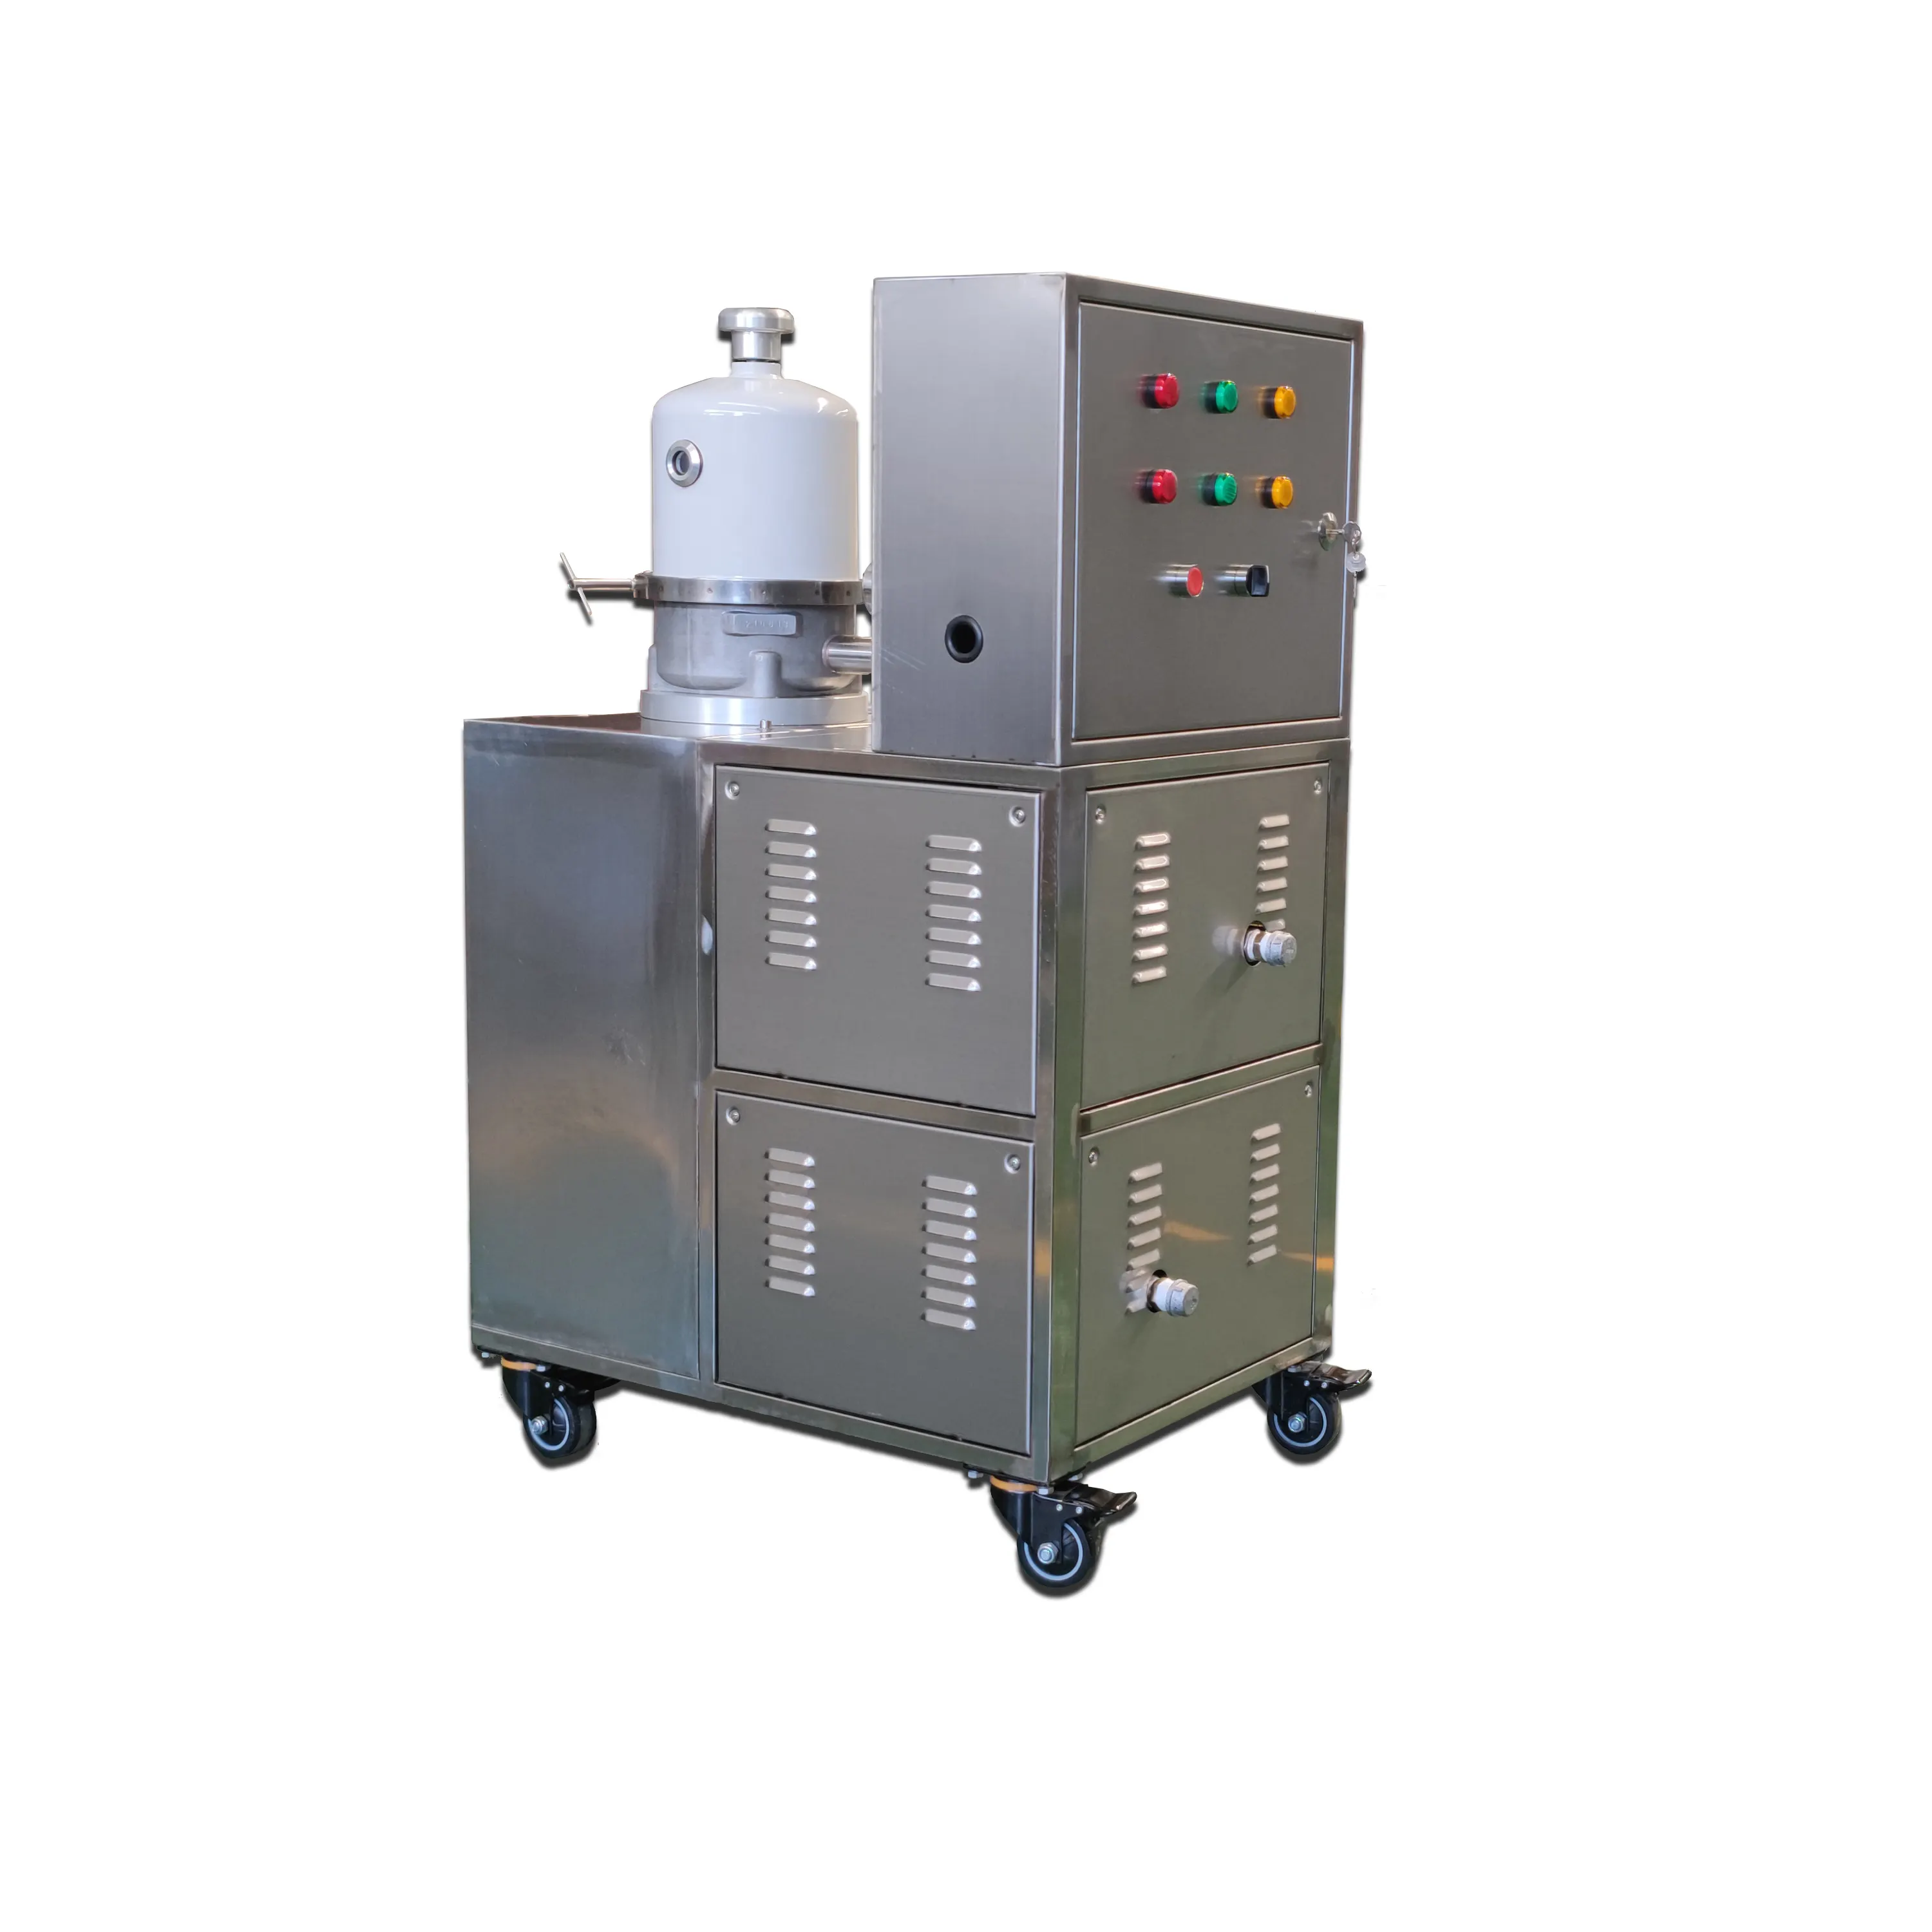 Oil filtration machine for the grinding oil